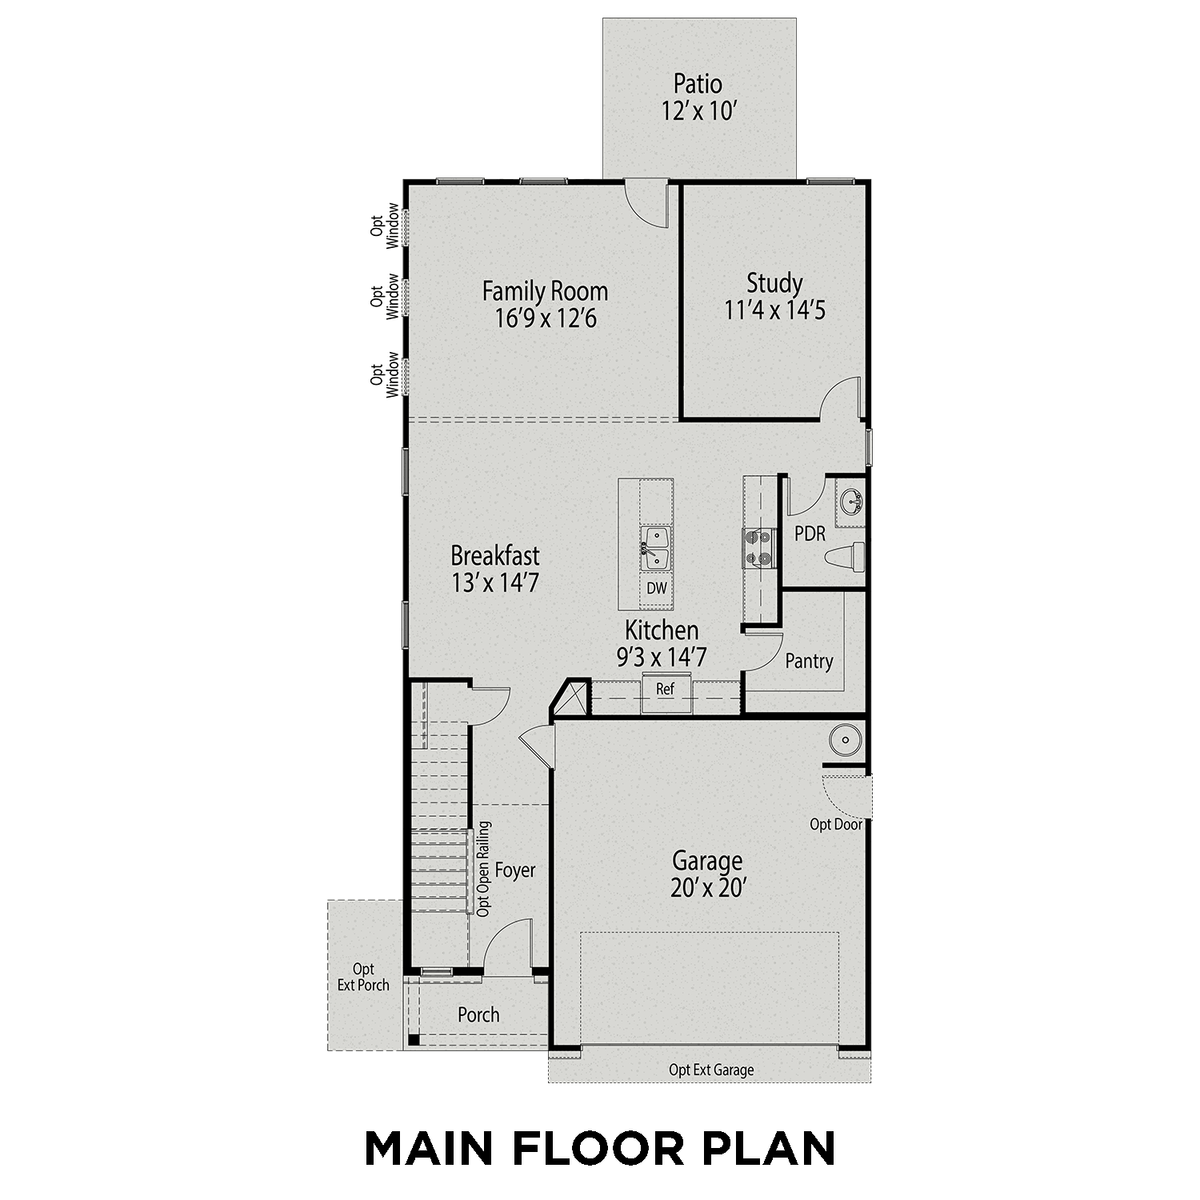 1 - The Adalynn B floor plan layout for 280 Old Fashioned Way in Davidson Homes' Wellers Knoll community.